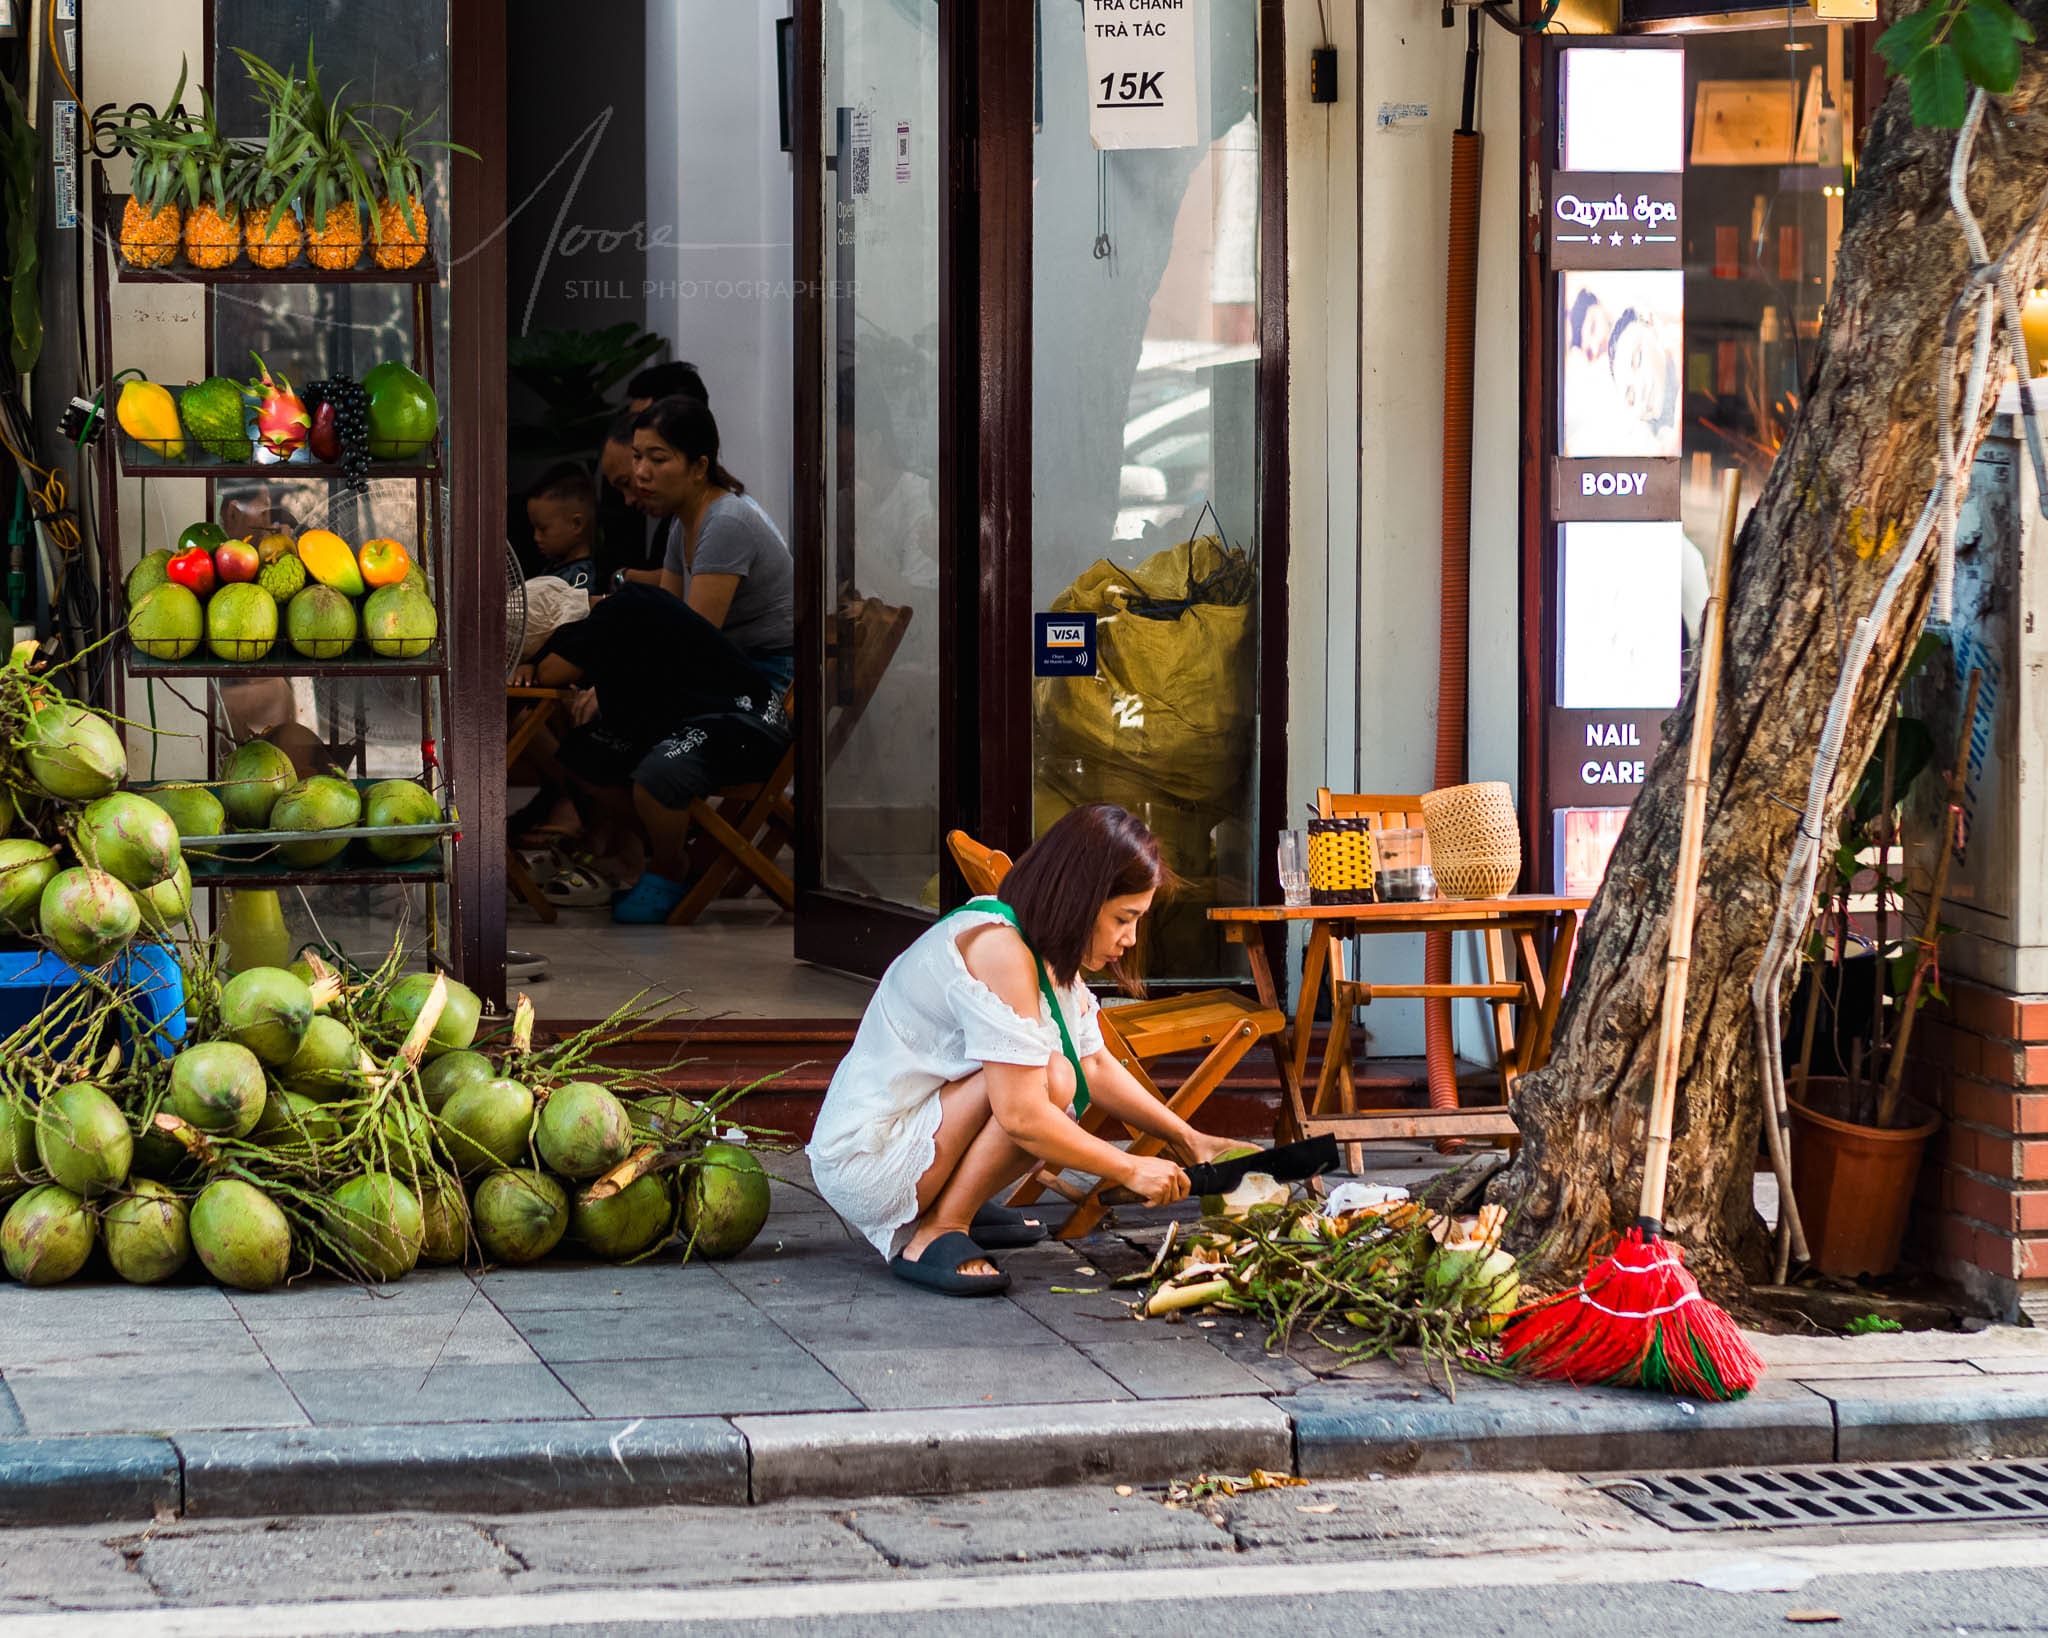 Tropical street scene with woman preparing coconuts, fresh fruit market, and urban tree.